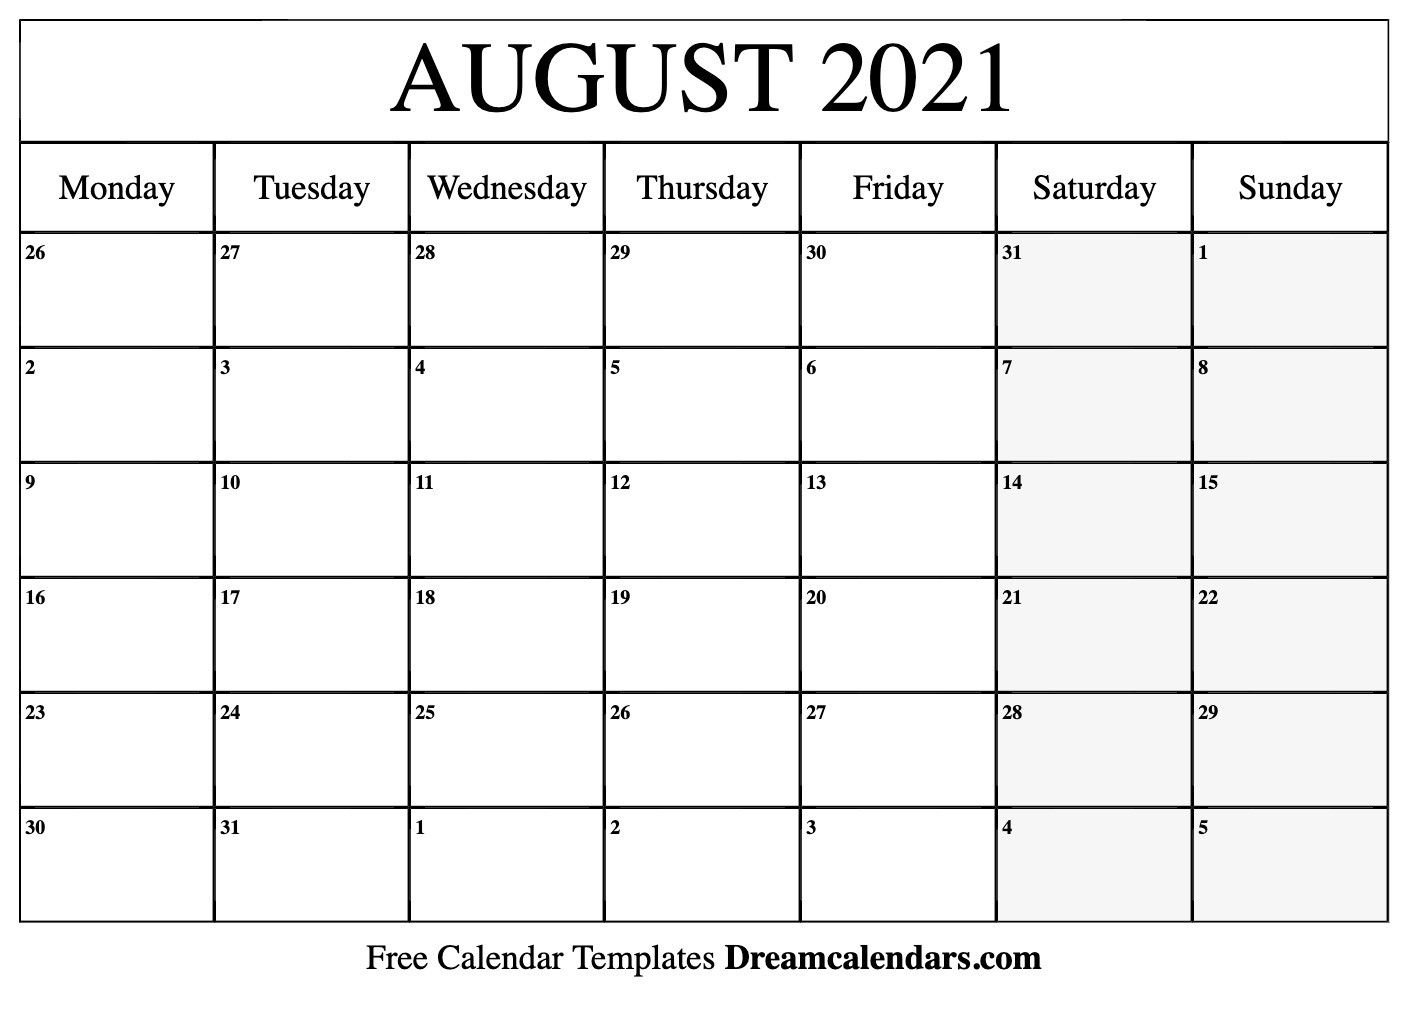 August 2021 Calendar | Free Blank Printable Templates-Monday-Friday August 2021